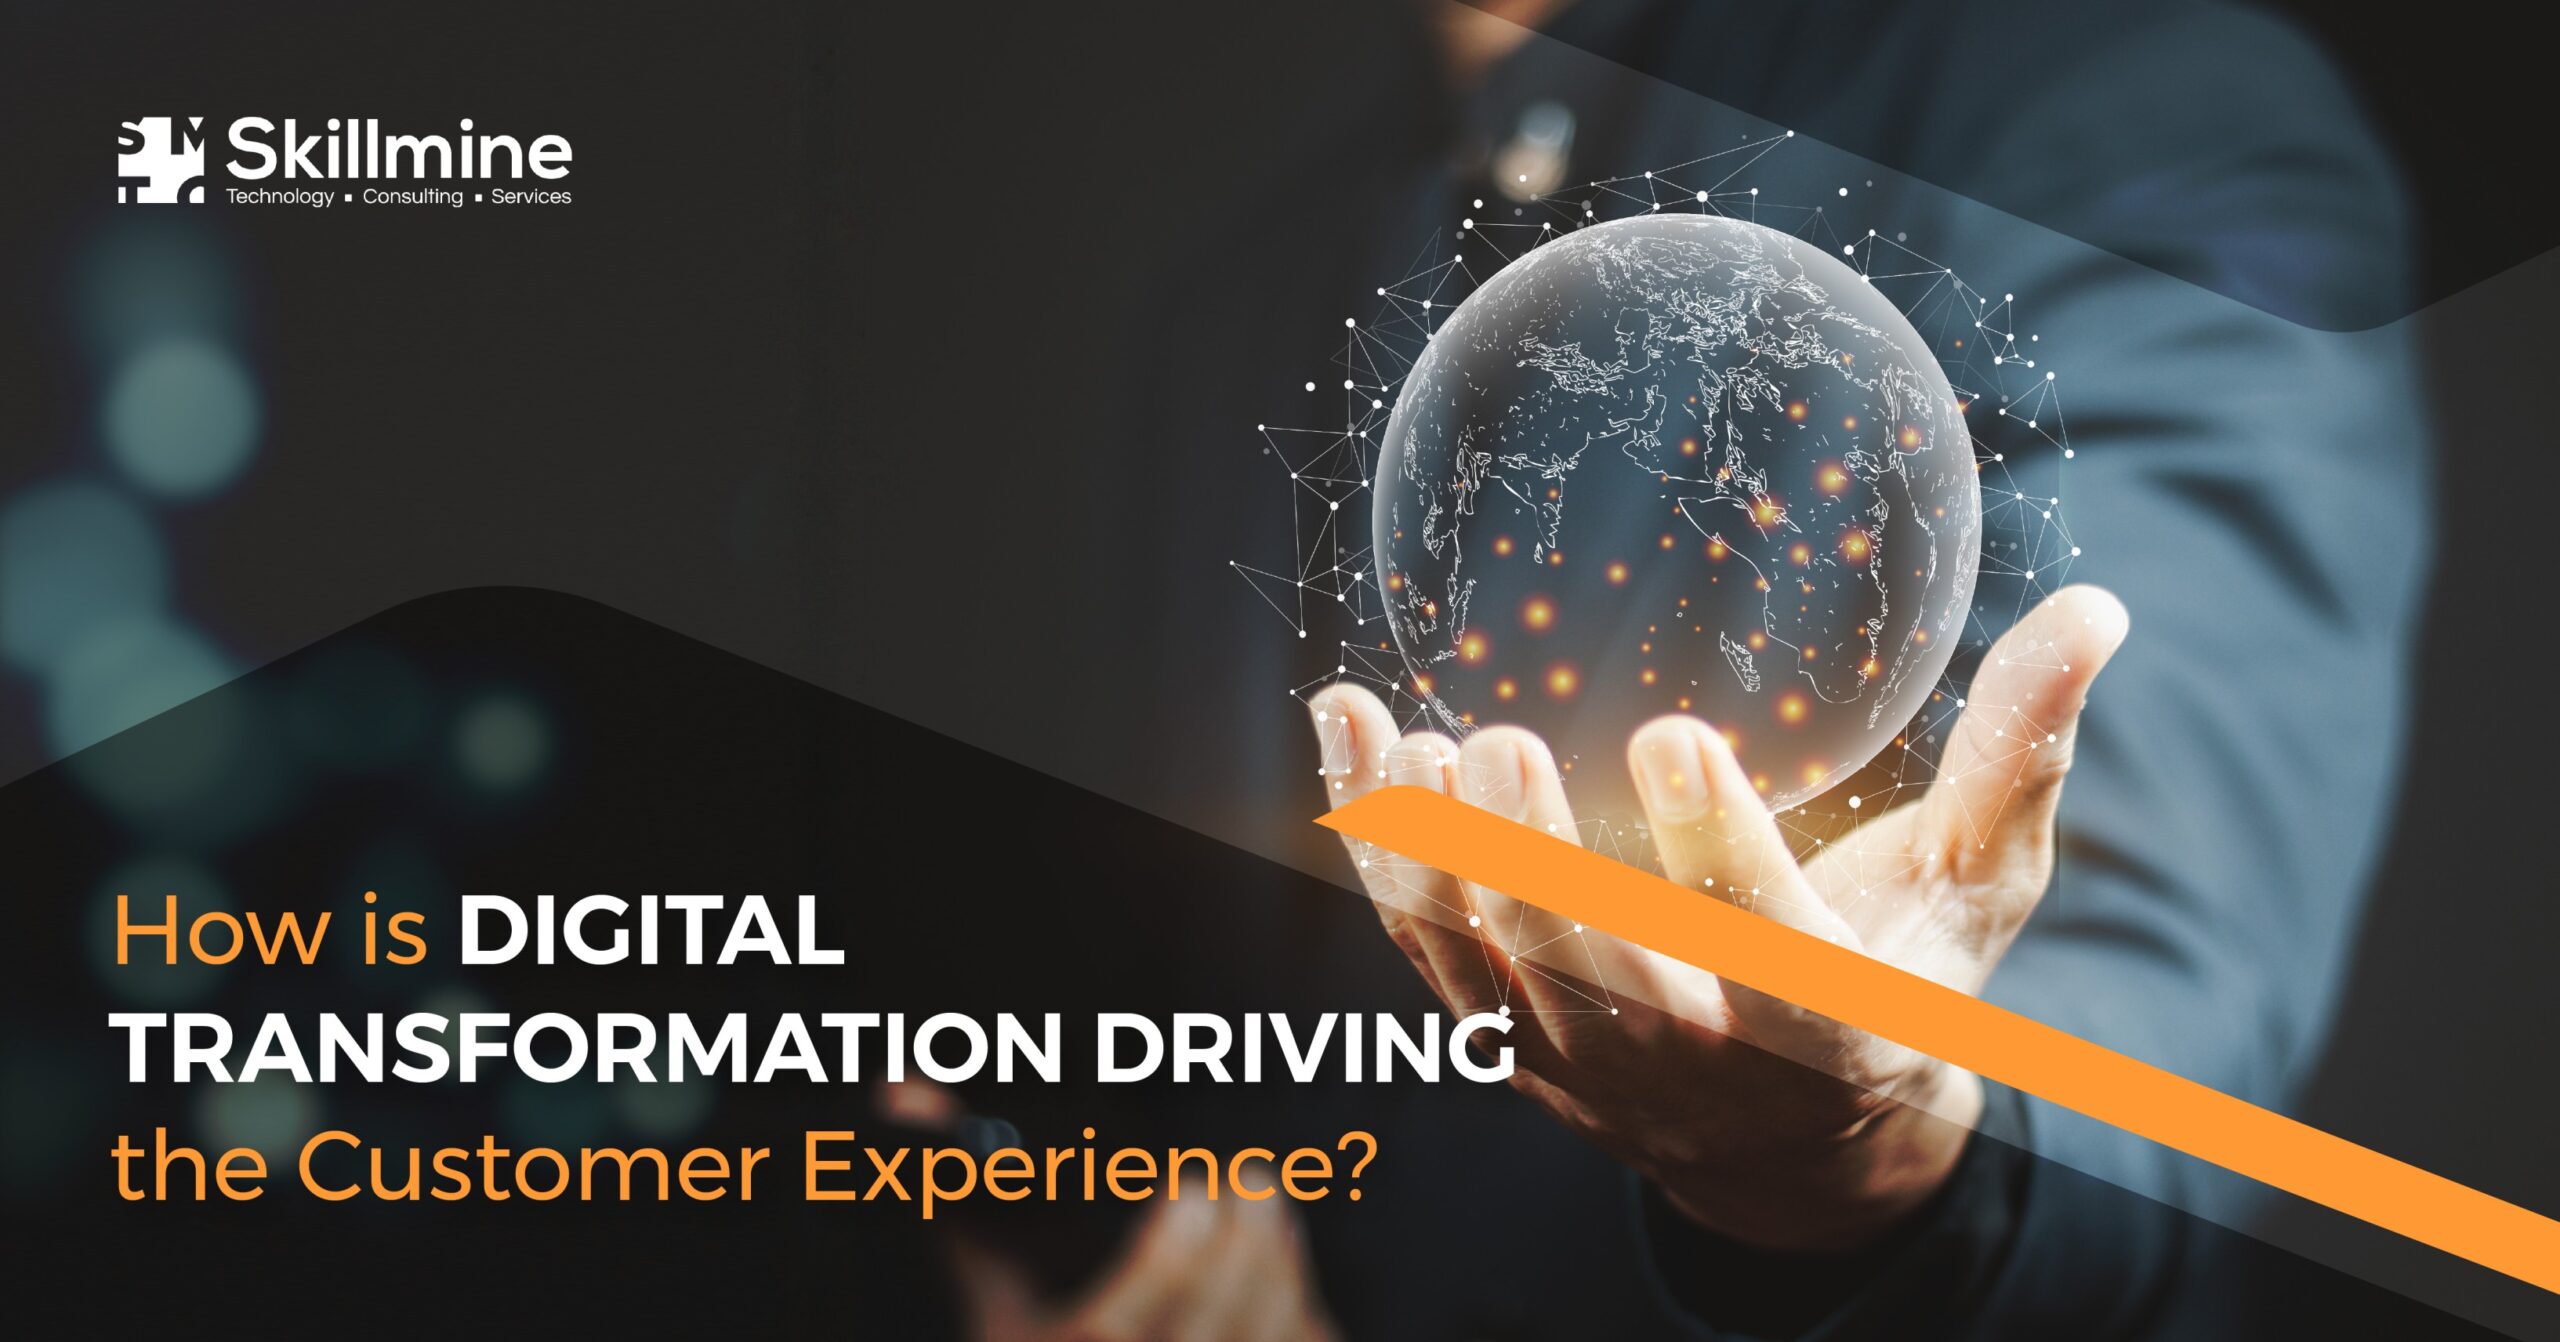 How is Digital Transformation Driving the Customer Experience?